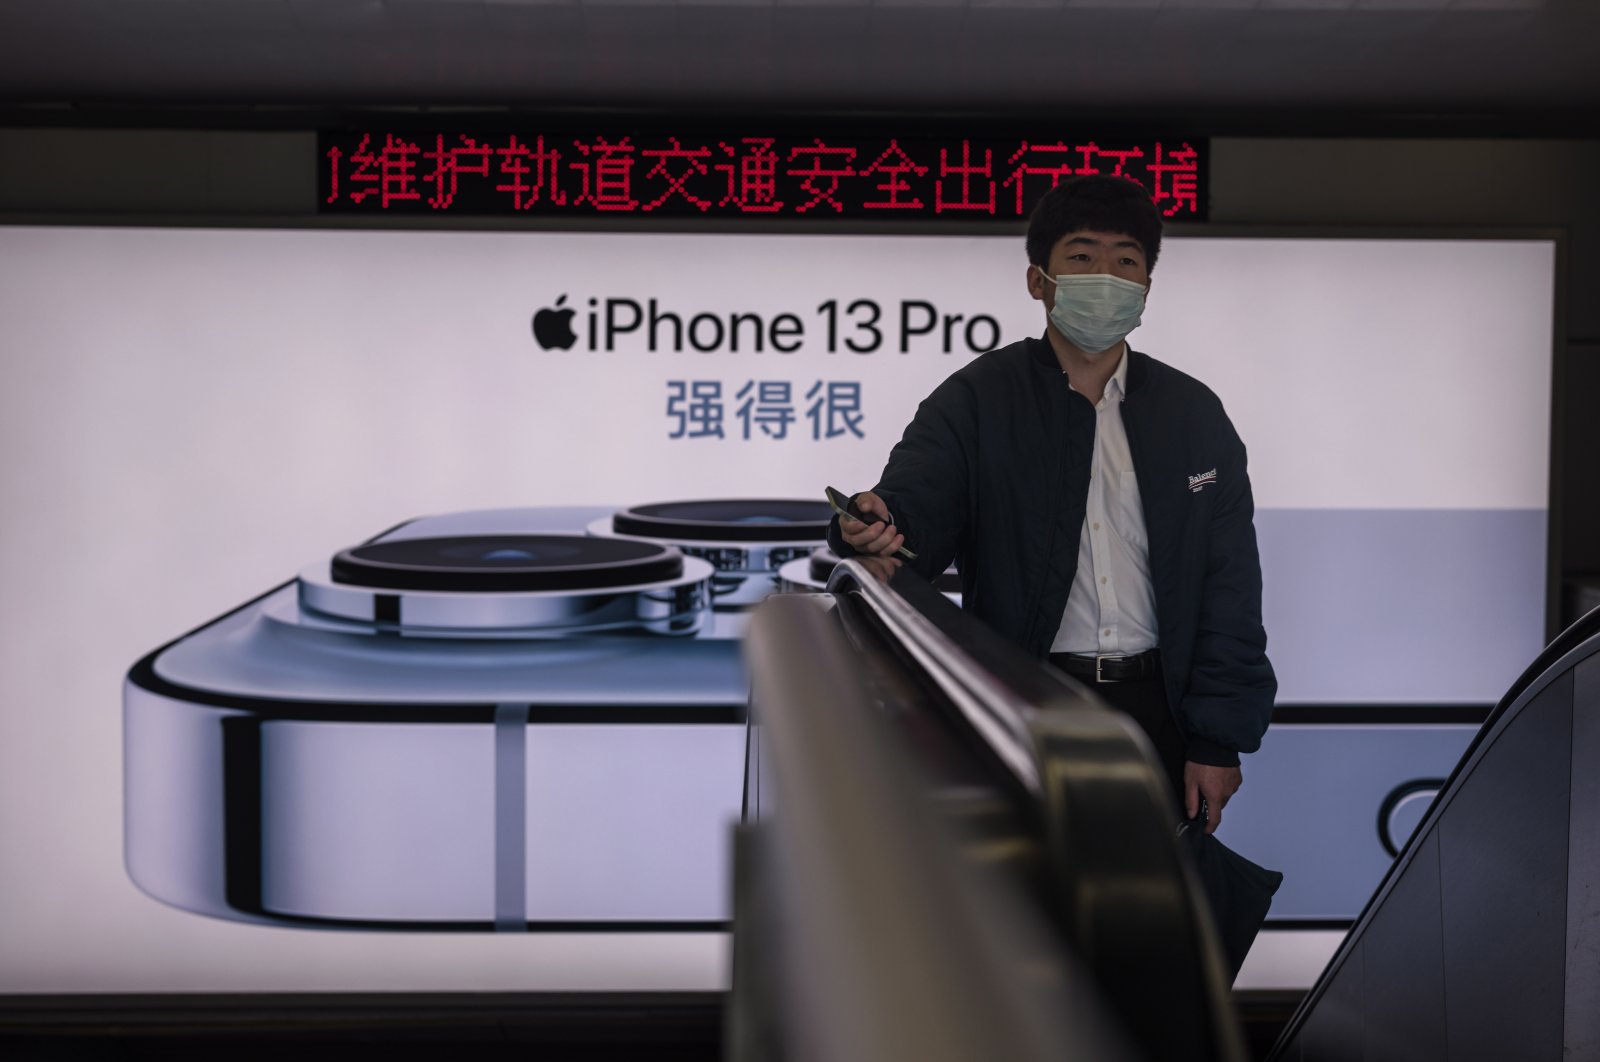 A man rides on the escalator in front of the advertisement for Apple’s iPhone 13 in Shanghai, China, Nov. 19, 2021. (EPA Photo)